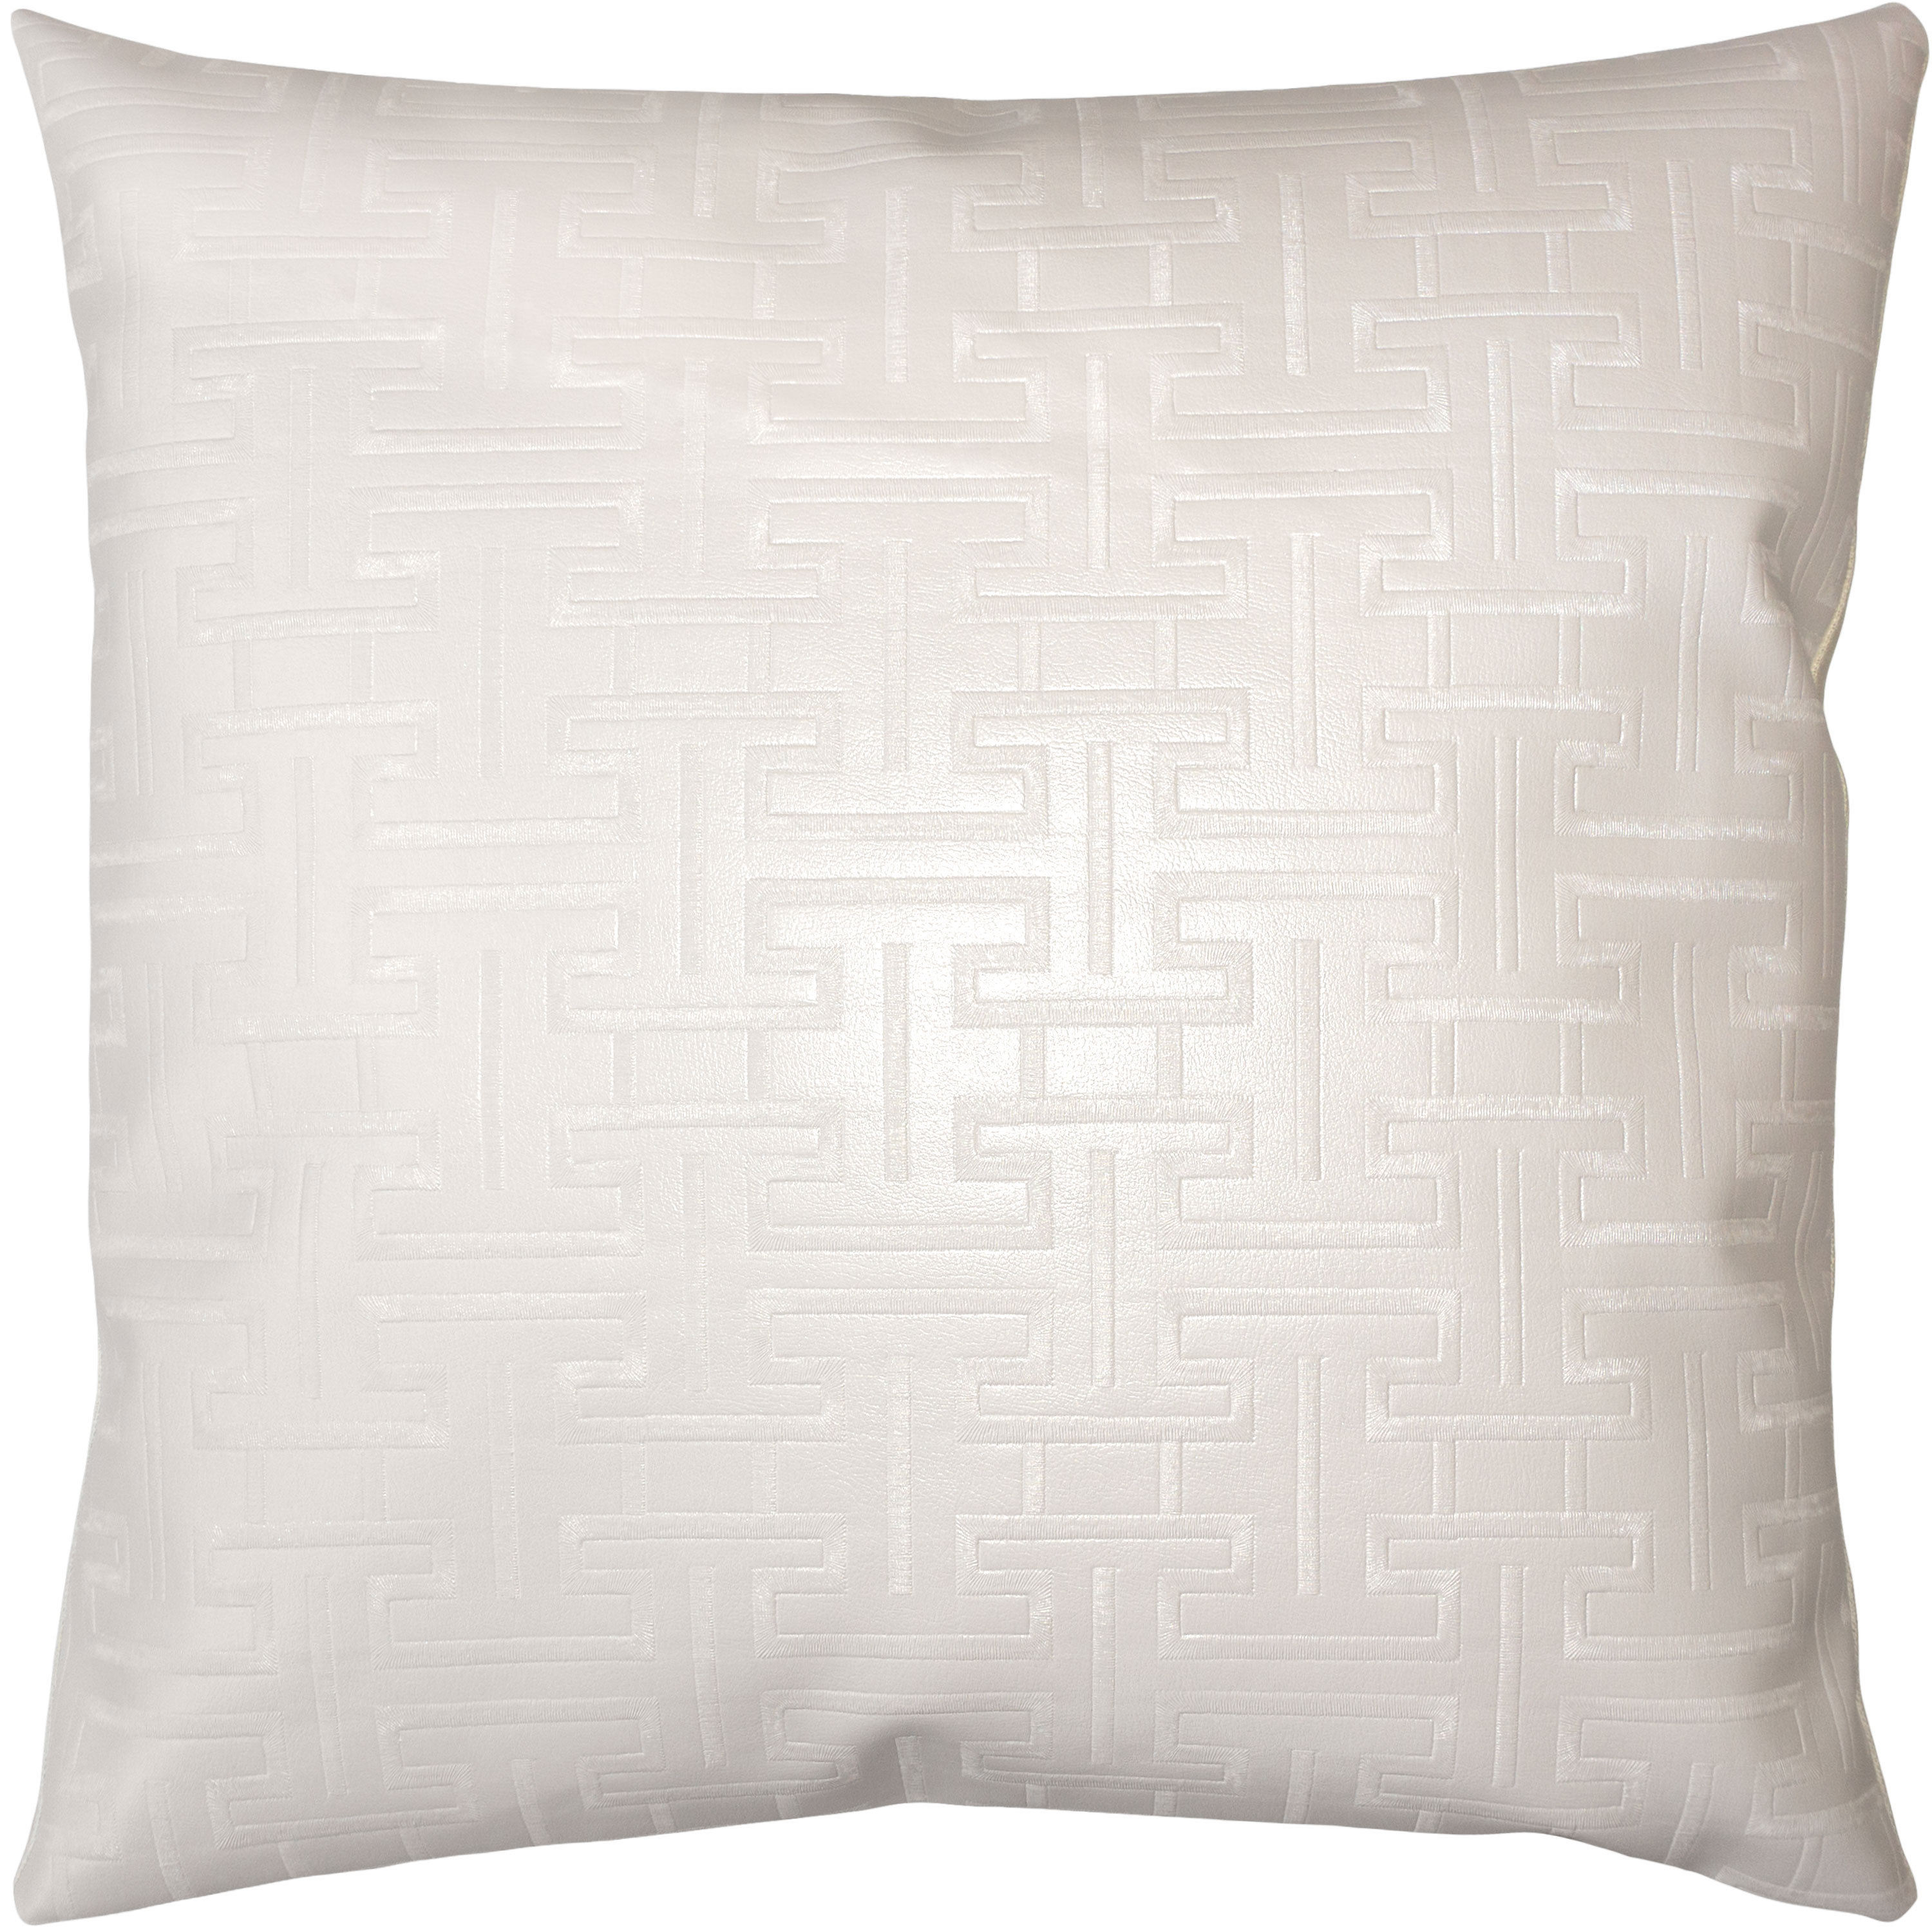 20 Beige & Gray Geometric Square Throw Pillow - Feather & Down Filler